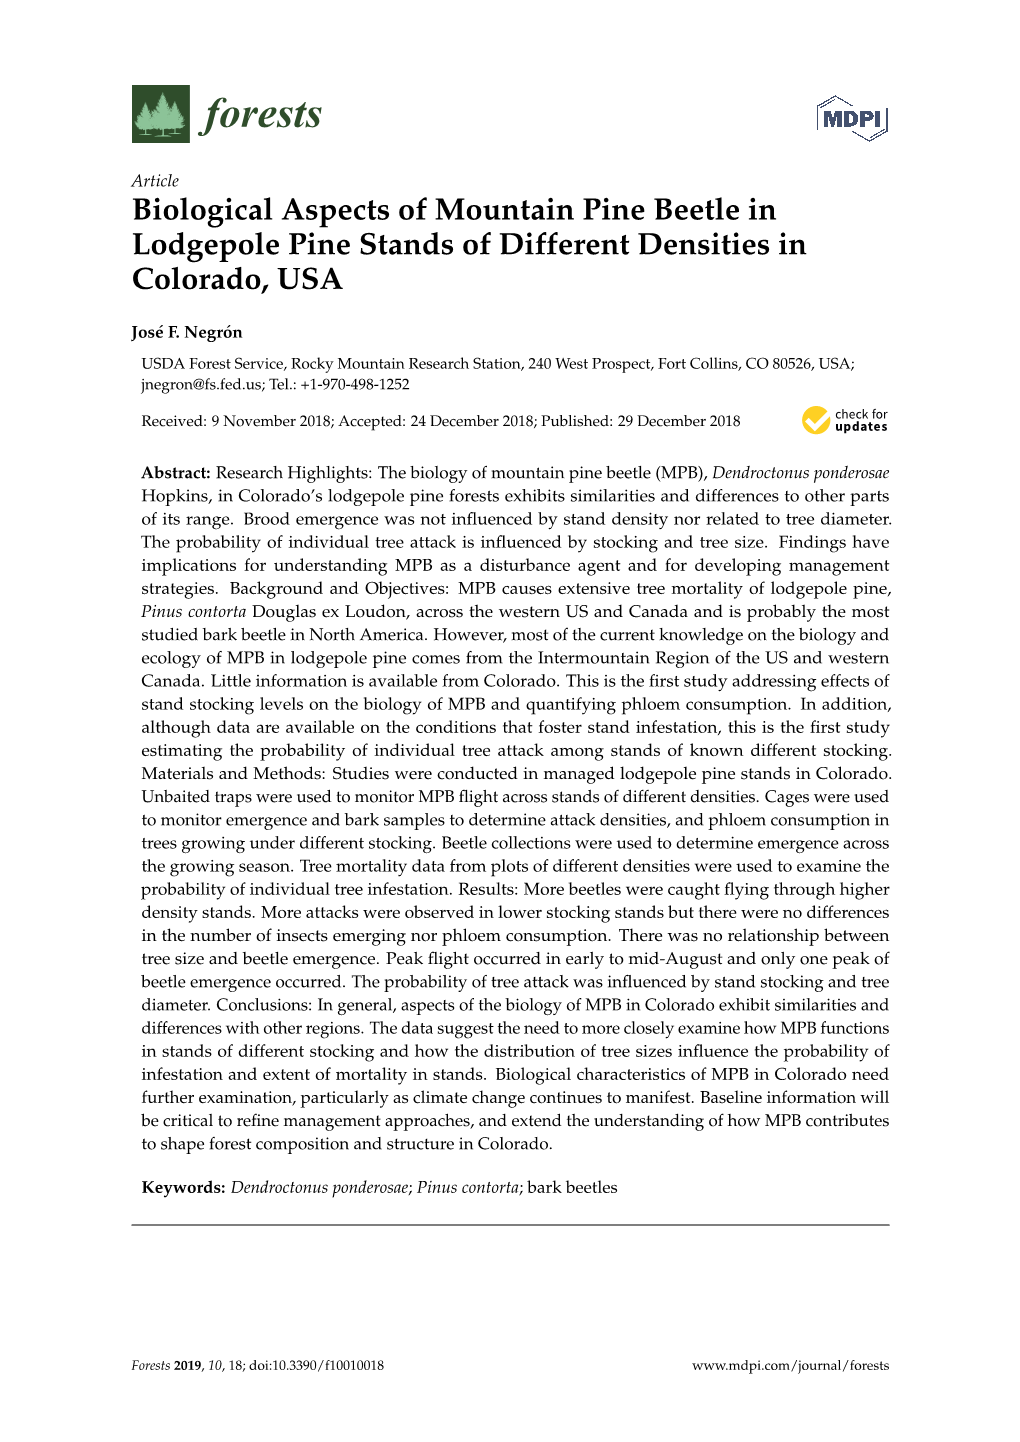 Biological Aspects of Mountain Pine Beetle in Lodgepole Pine Stands of Different Densities in Colorado, USA